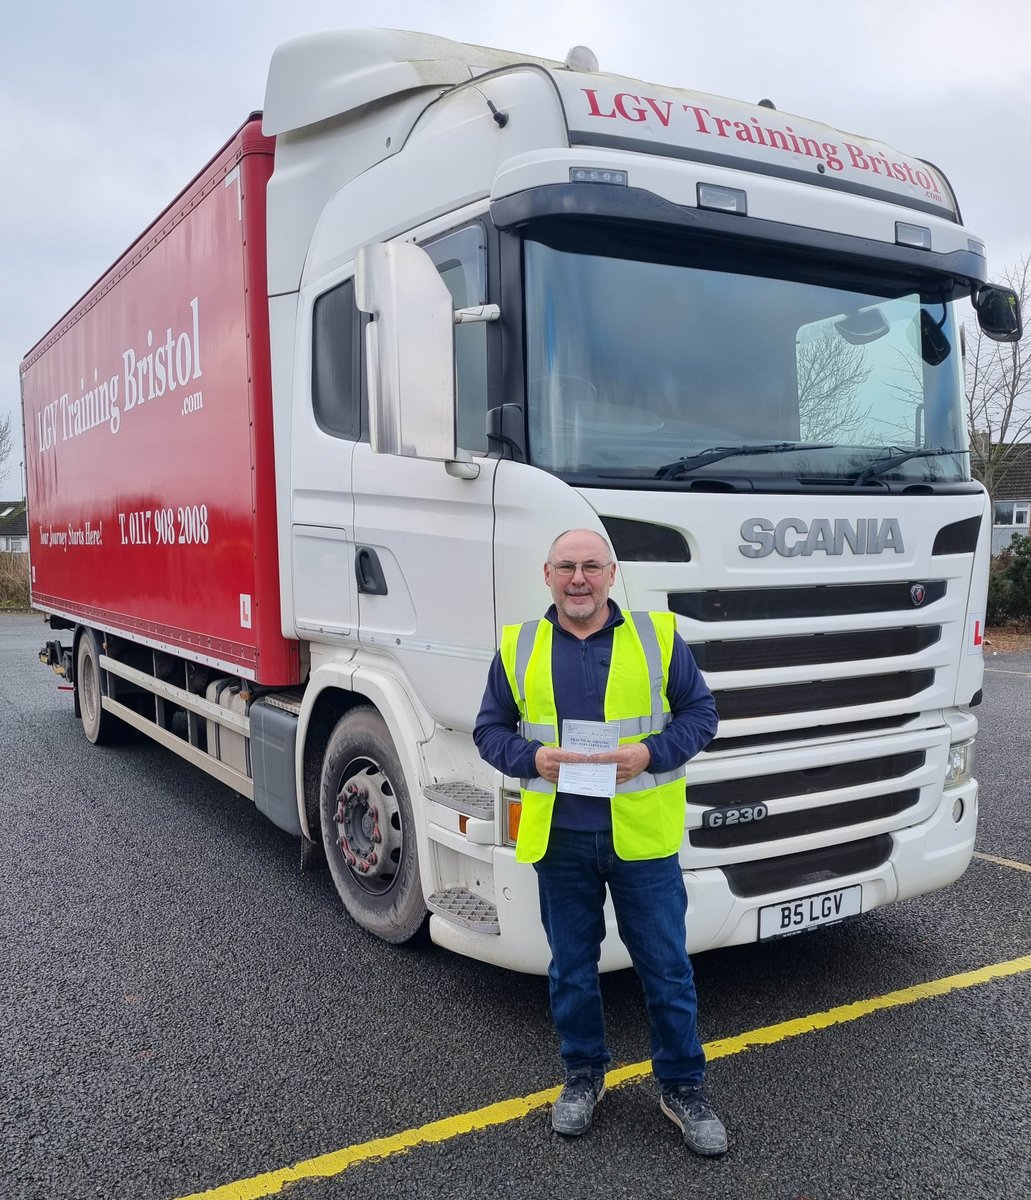 Congratulations to Dave, on a well deserved first time, Cat.C test pass today and with no driving faults whatsoever. Keep up the safe driving mate. We wish you all the very best for the future! LGVTrainingBristol.com #YourJourneyStartsHere